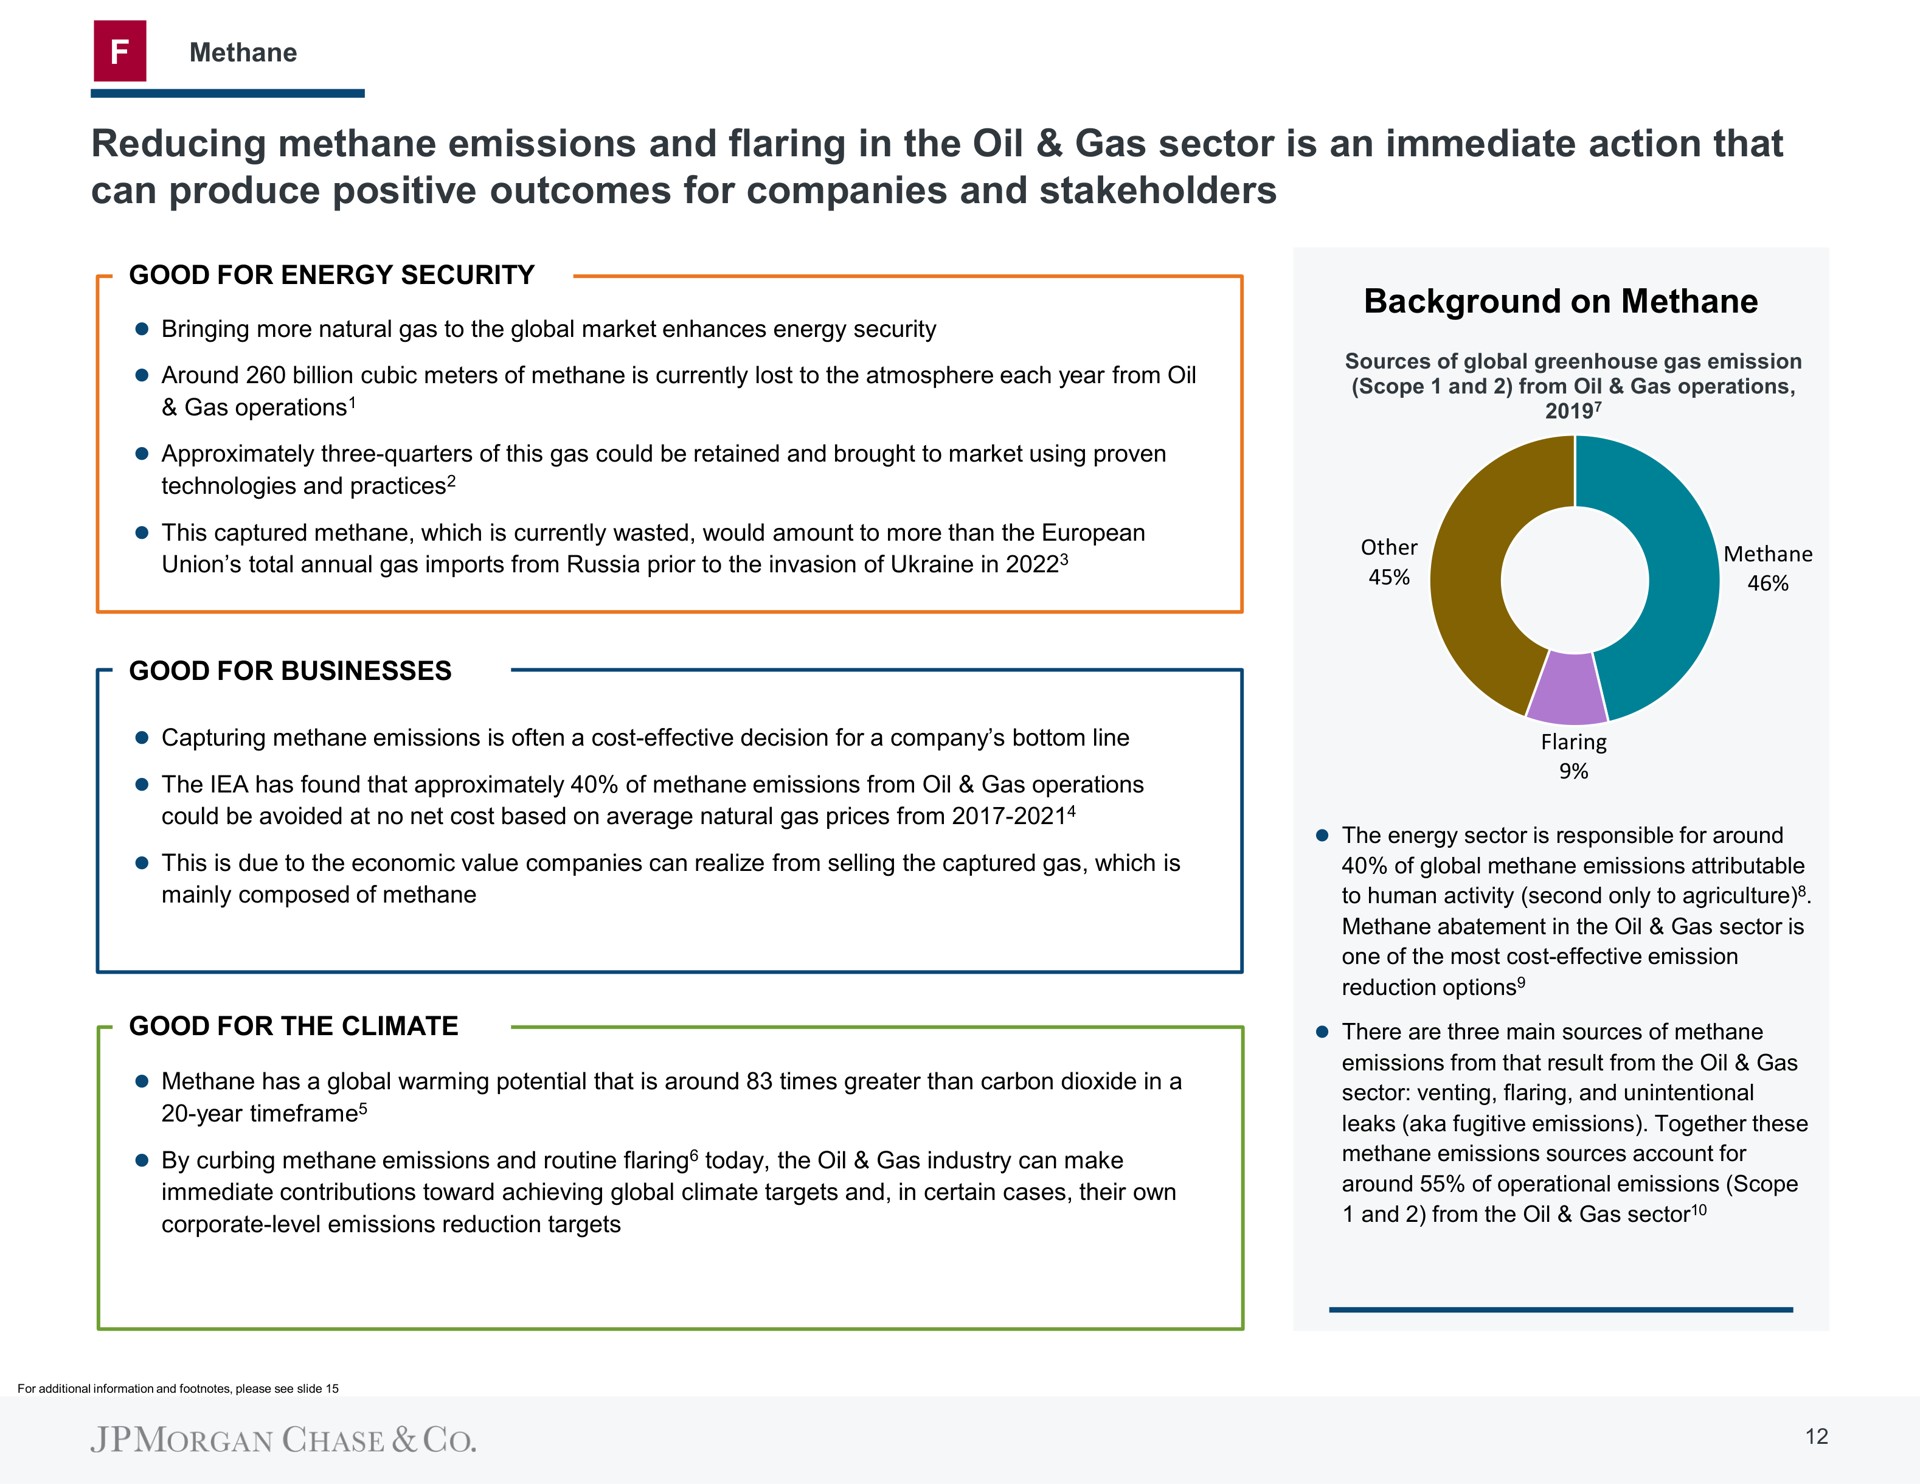 reducing methane emissions and flaring in the oil gas sector is an immediate action that can produce positive outcomes for companies and stakeholders | J.P.Morgan